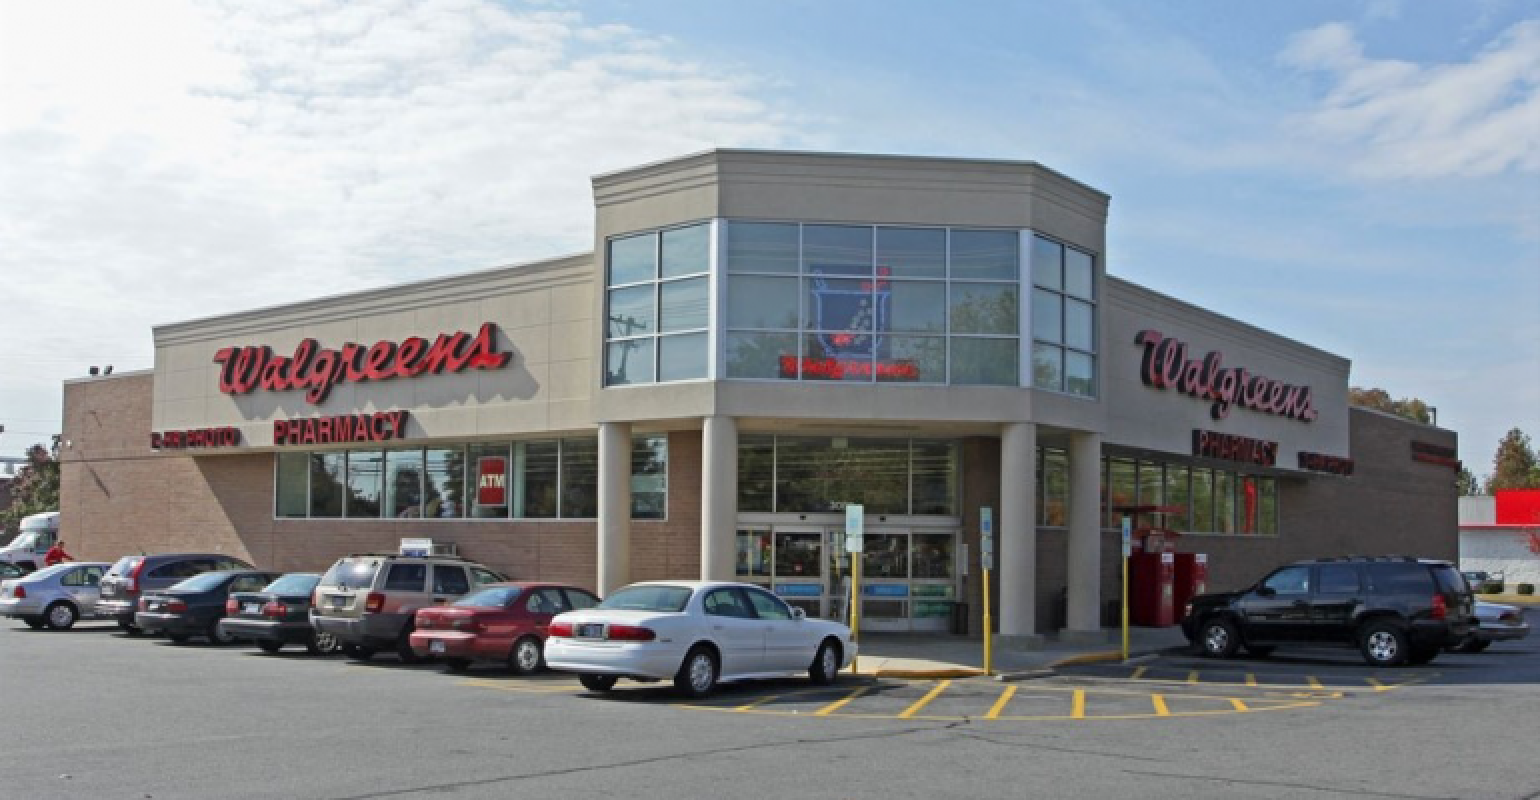 Report KKR making buyout pitch to Walgreens Supermarket News